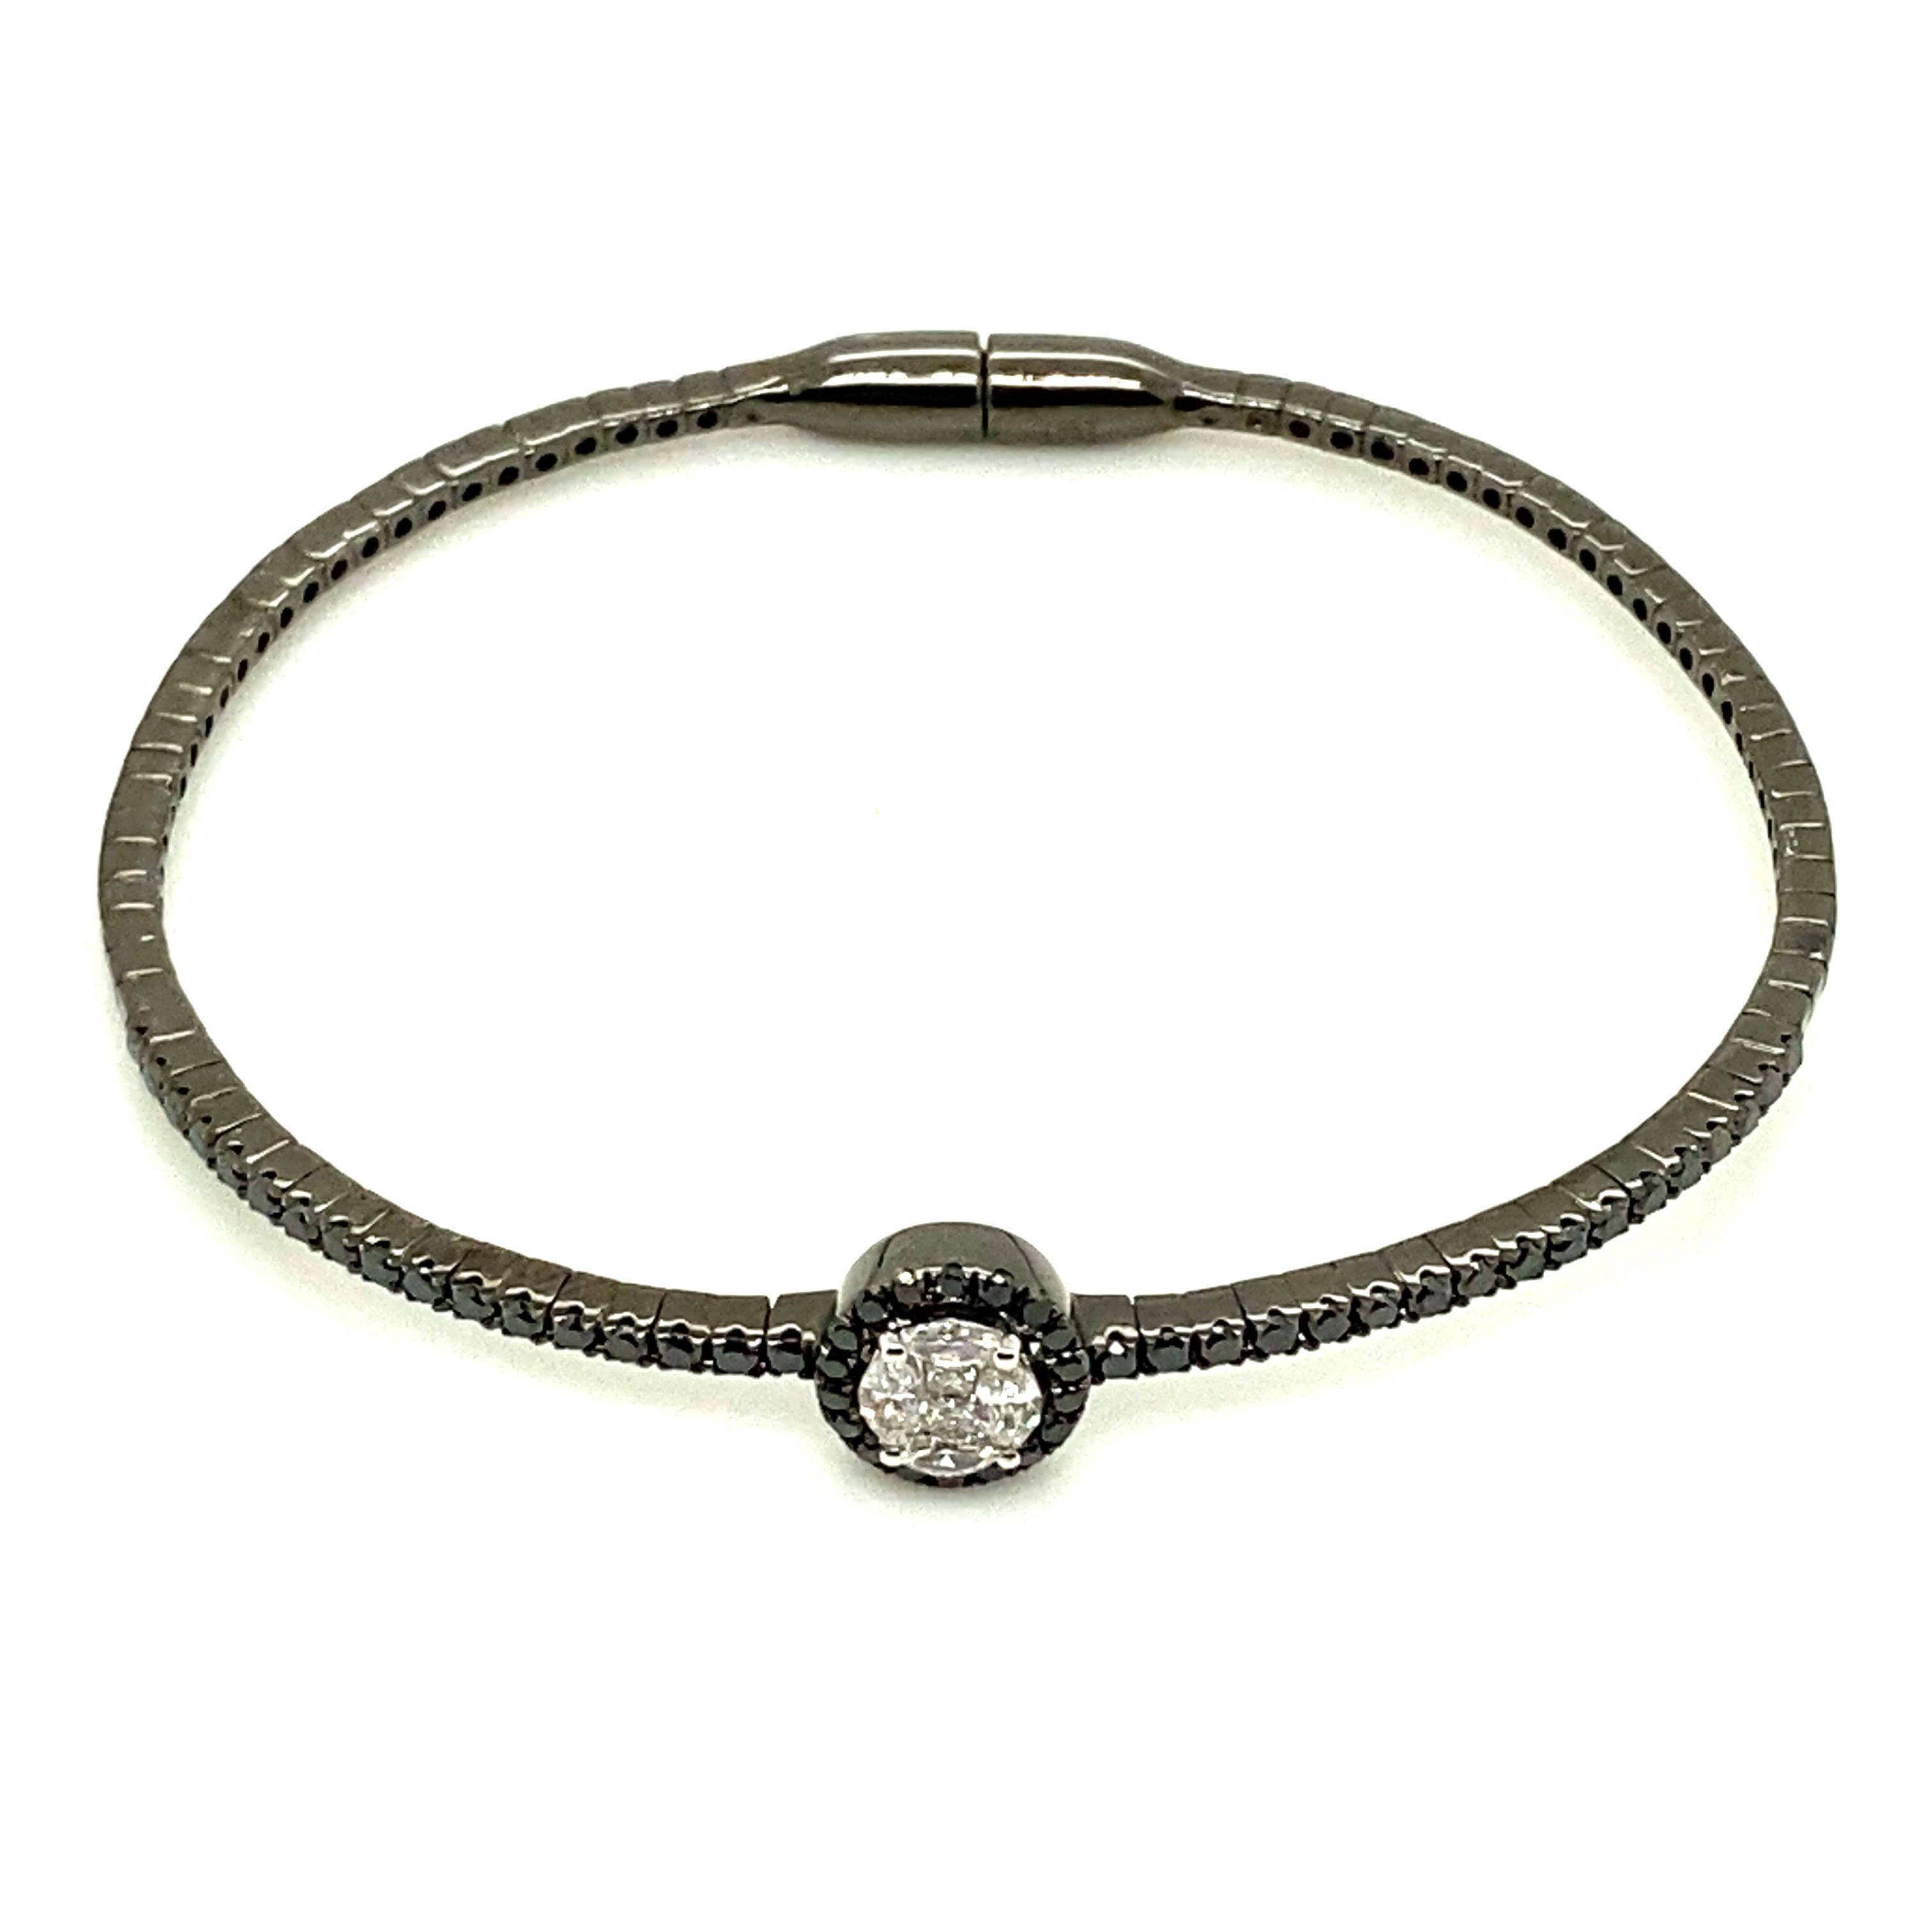 White Diamond and Blackened Gold Bracelet:

An elegant bracelet, it features a cluster of oval-shape diamonds weighing 0.89 carat situated in the centre of the bracelet. The diamonds are of fine quality and clarity. The design of the bracelet is